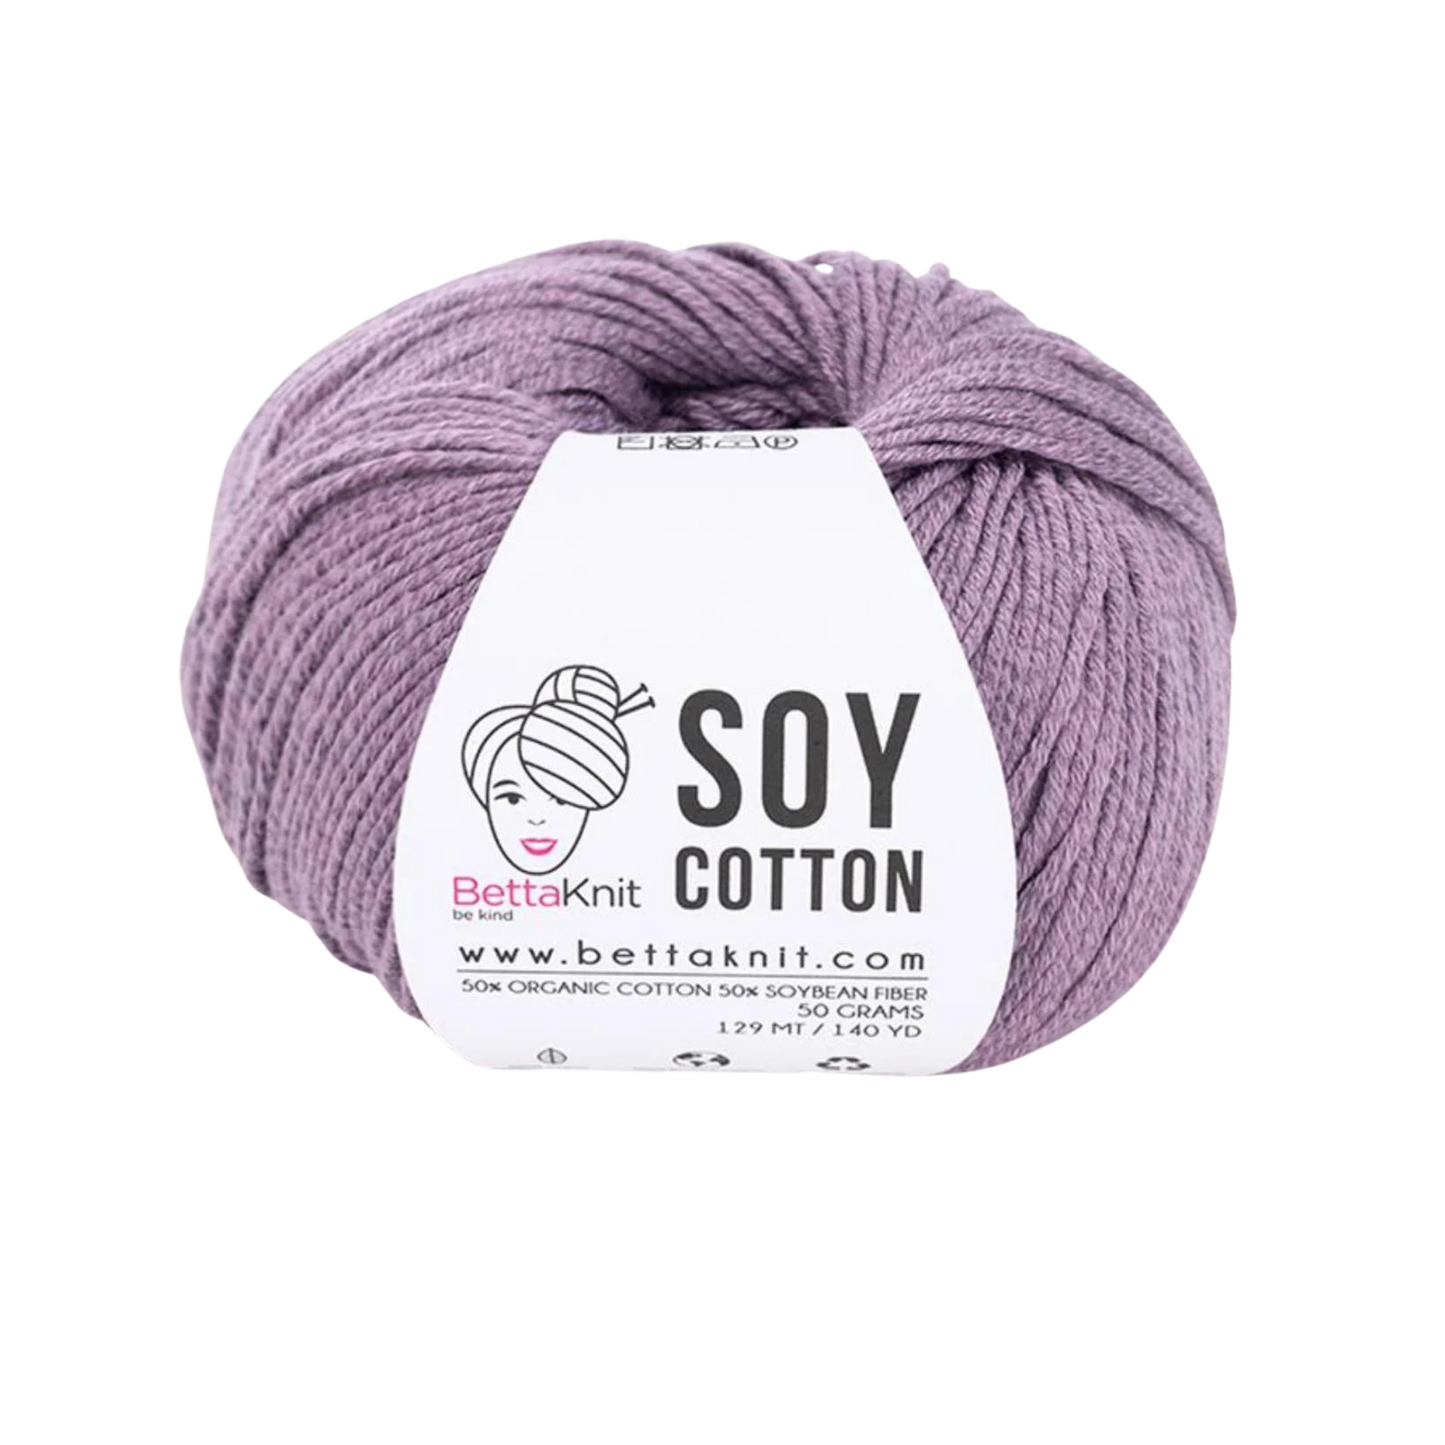 Soy Cotton, Cotton and soy Yarn